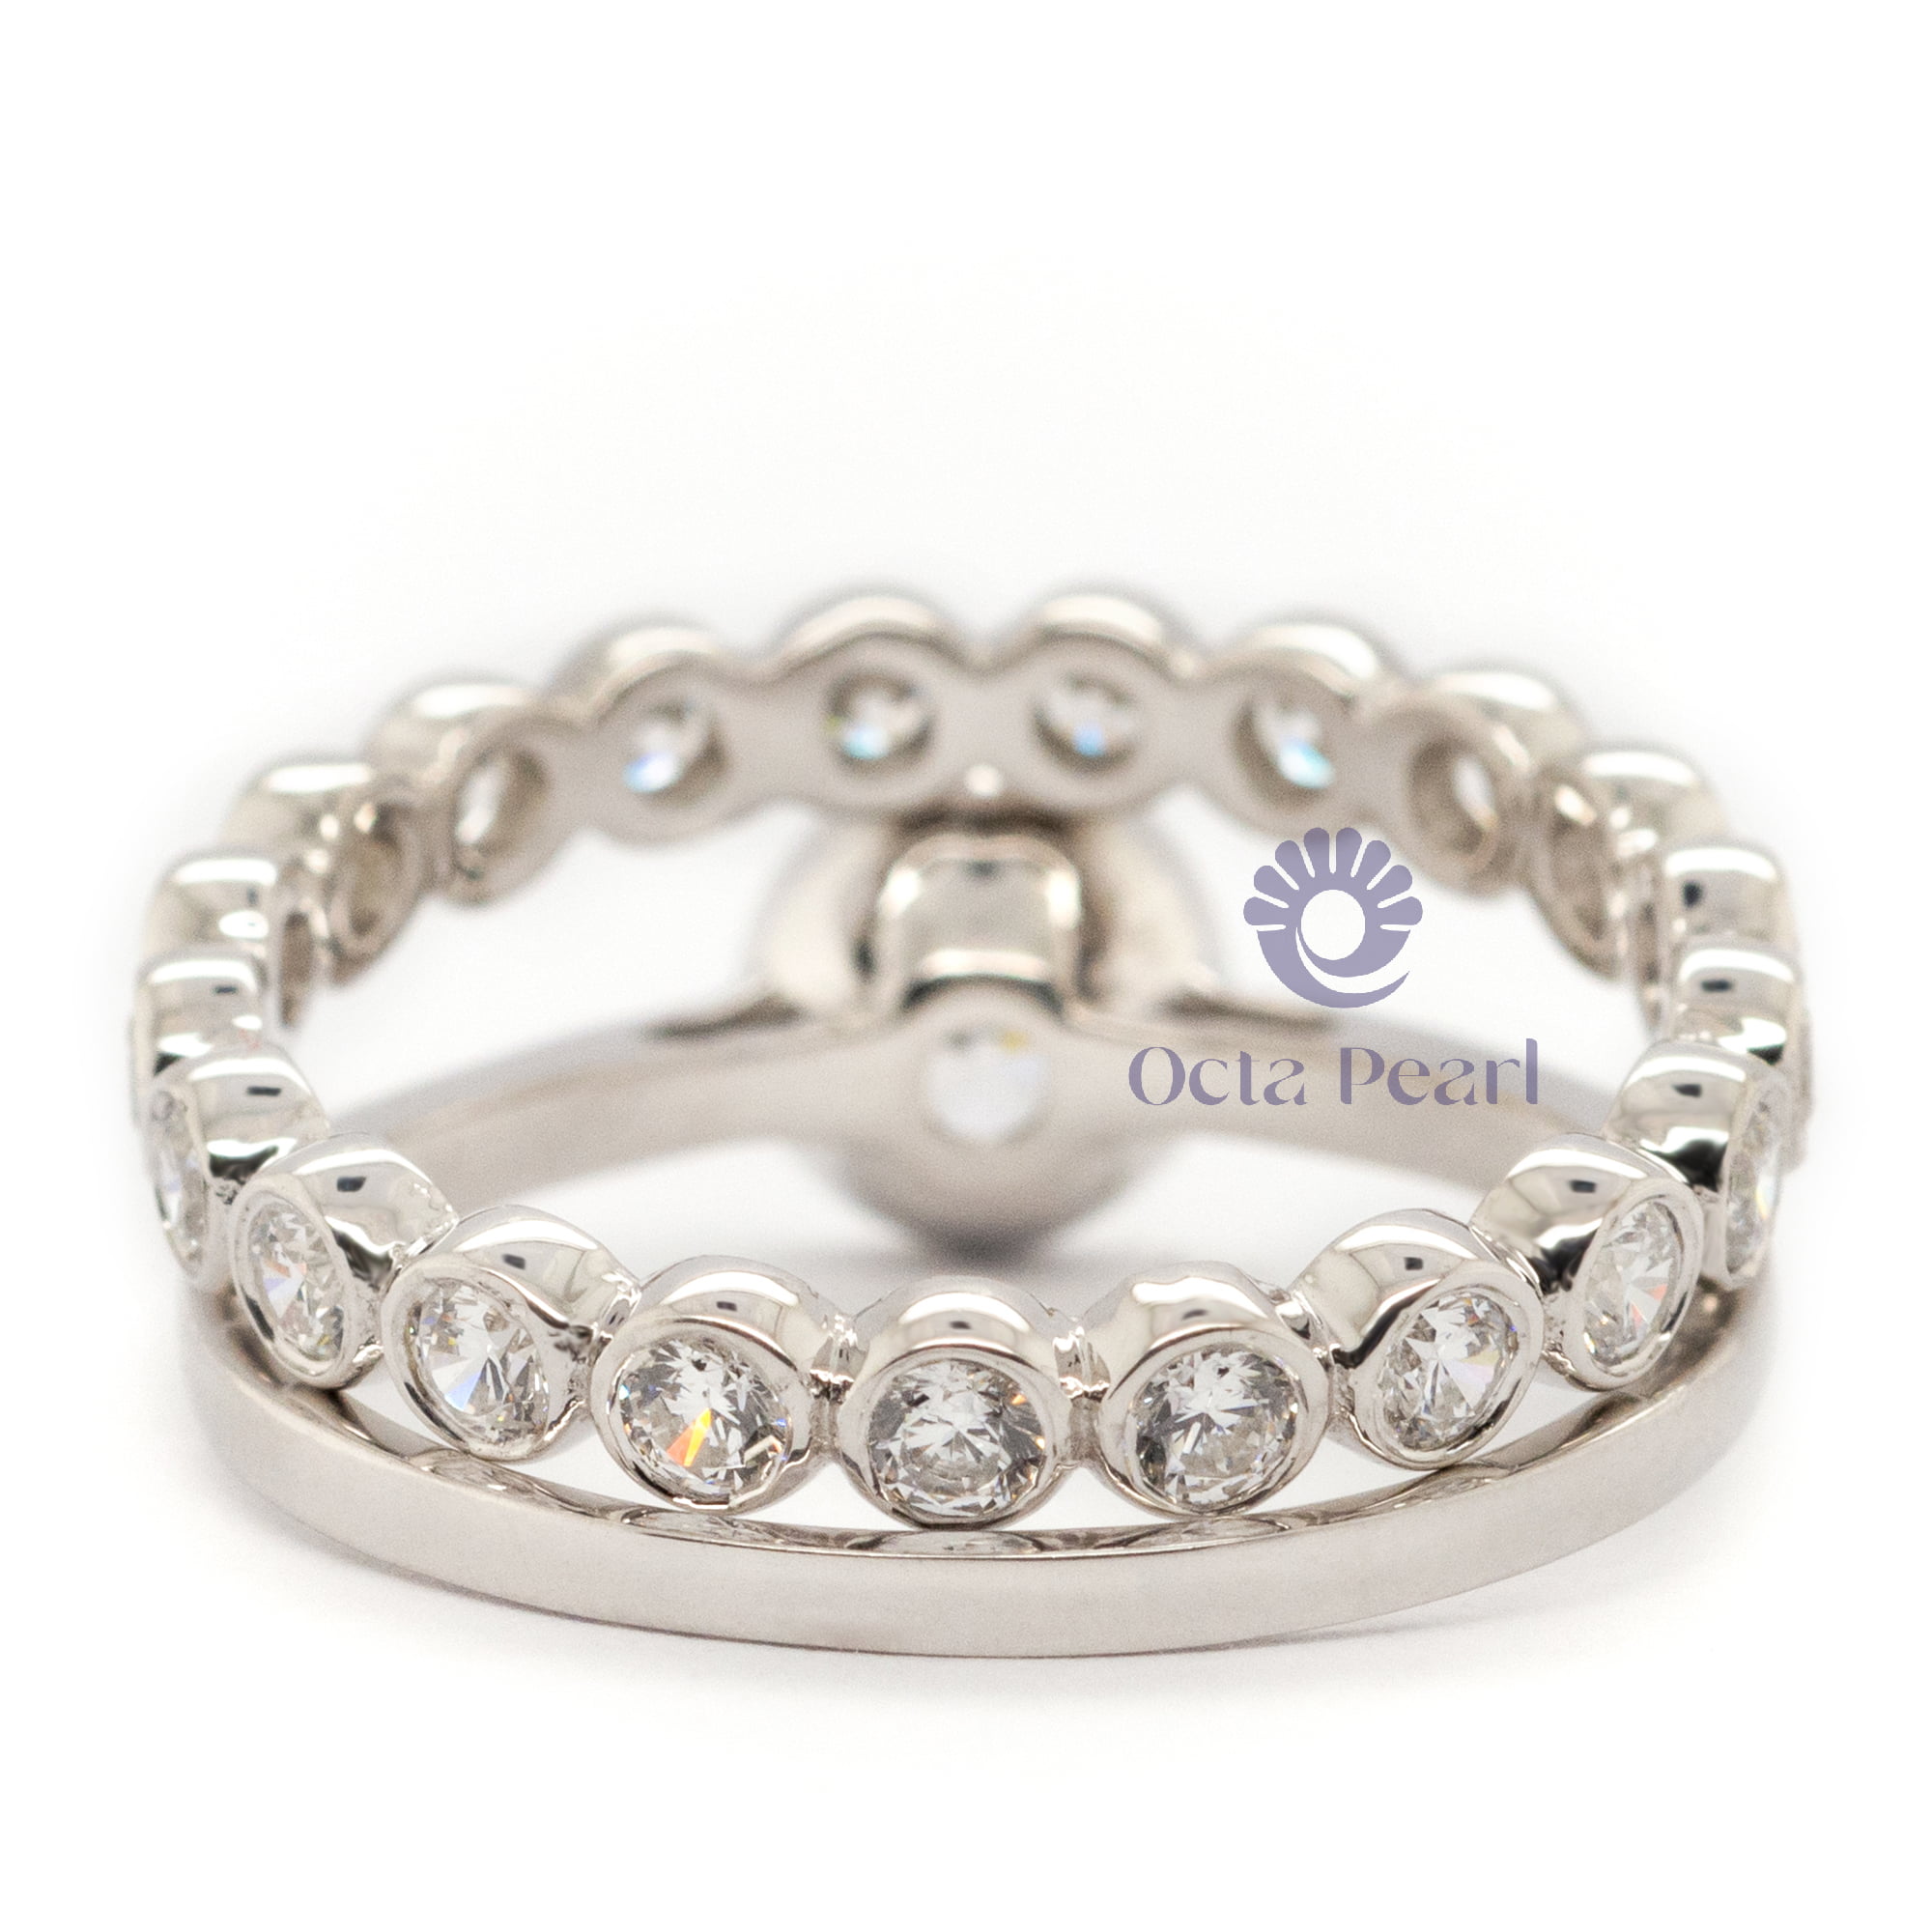 Bezel Set Round Cut Moissanite With Eternity Band Ring Set For Her (2 1/7 TCW)